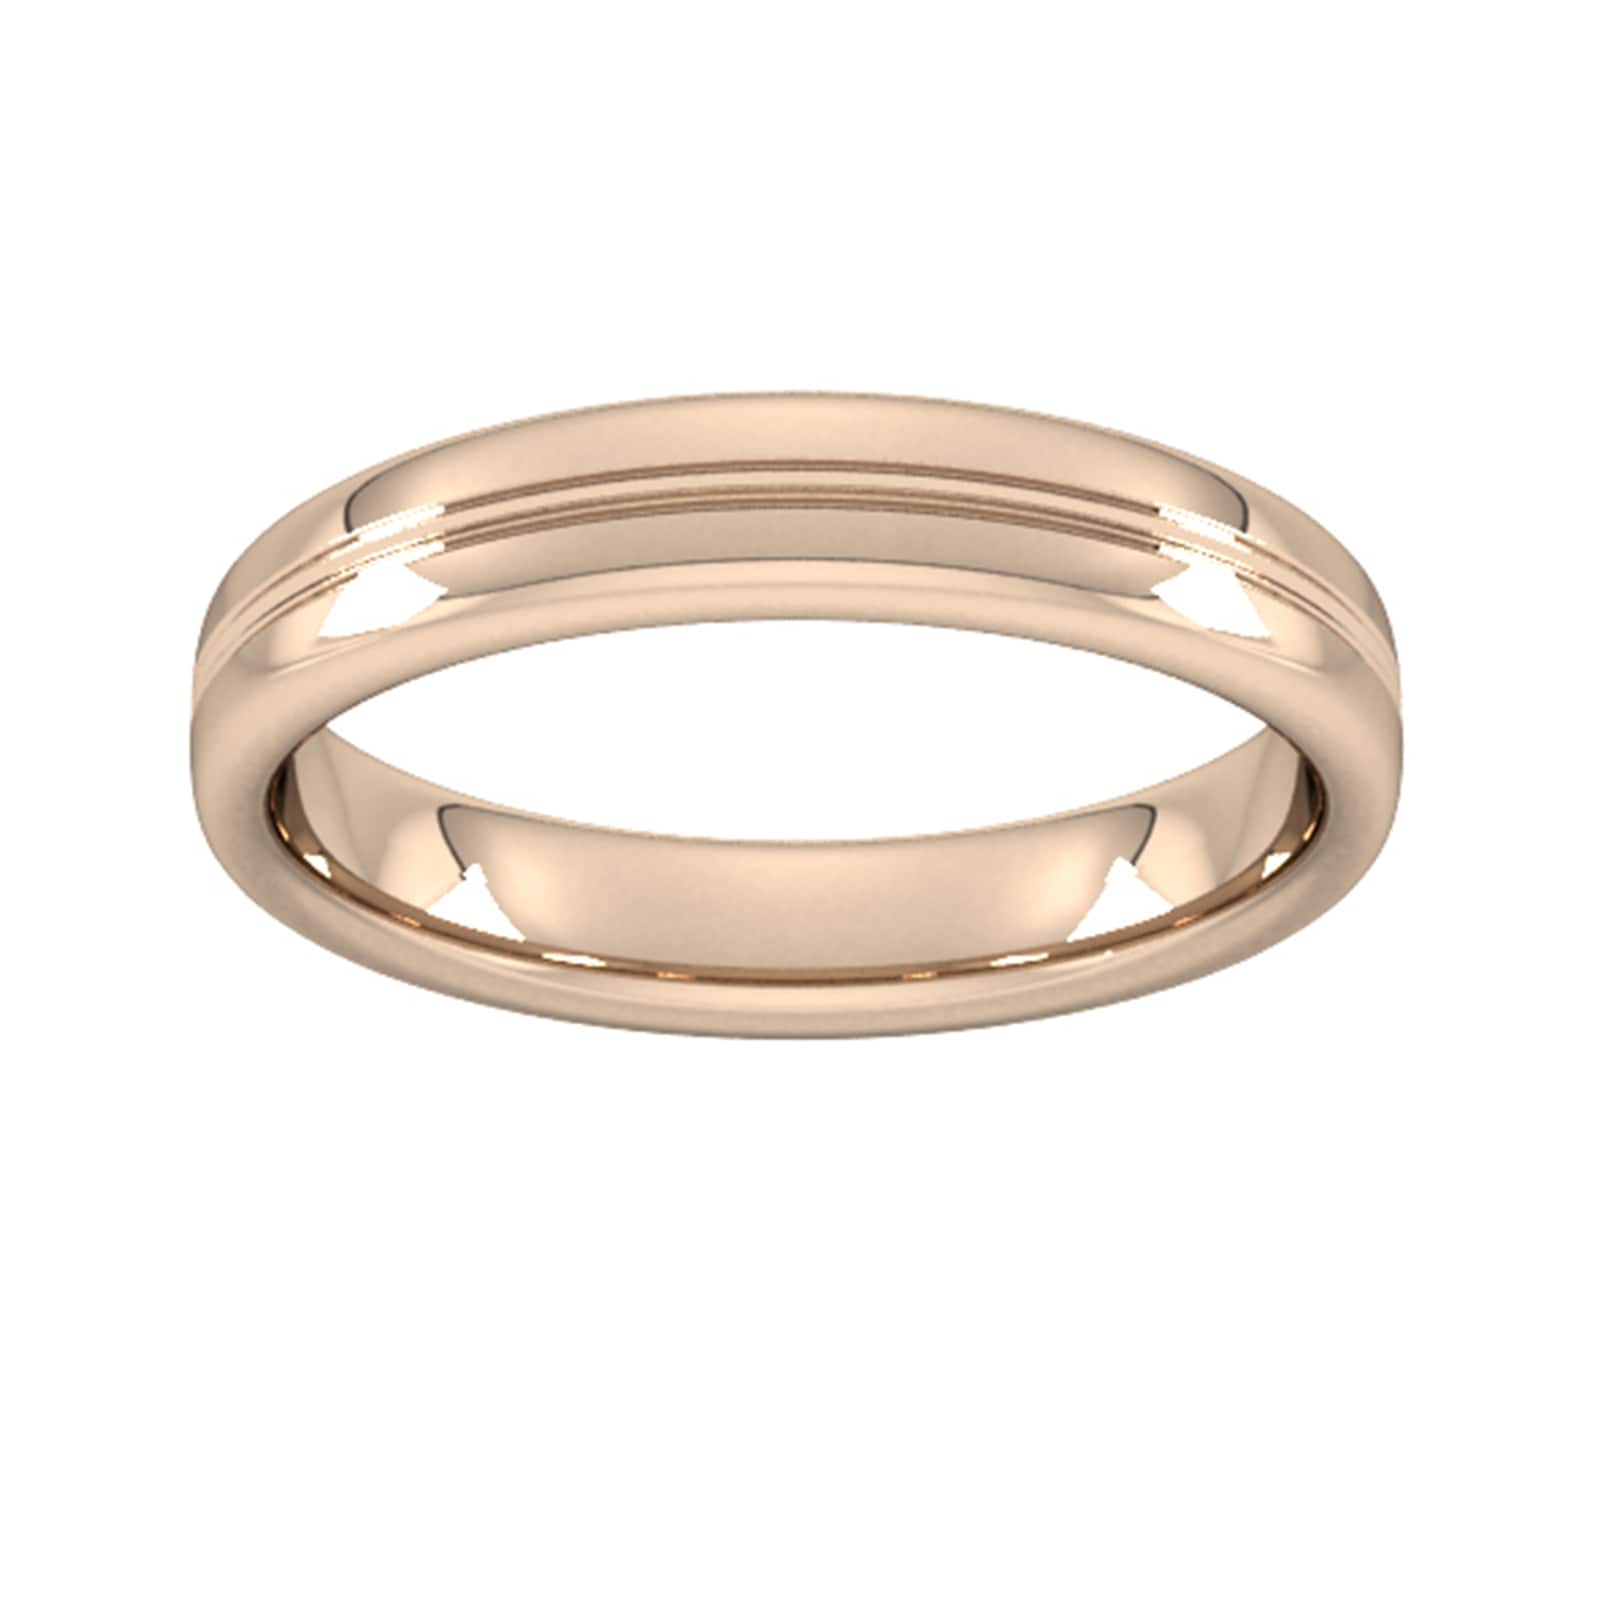 4mm Slight Court Extra Heavy Grooved Polished Finish Wedding Ring In 18 Carat Rose Gold - Ring Size H